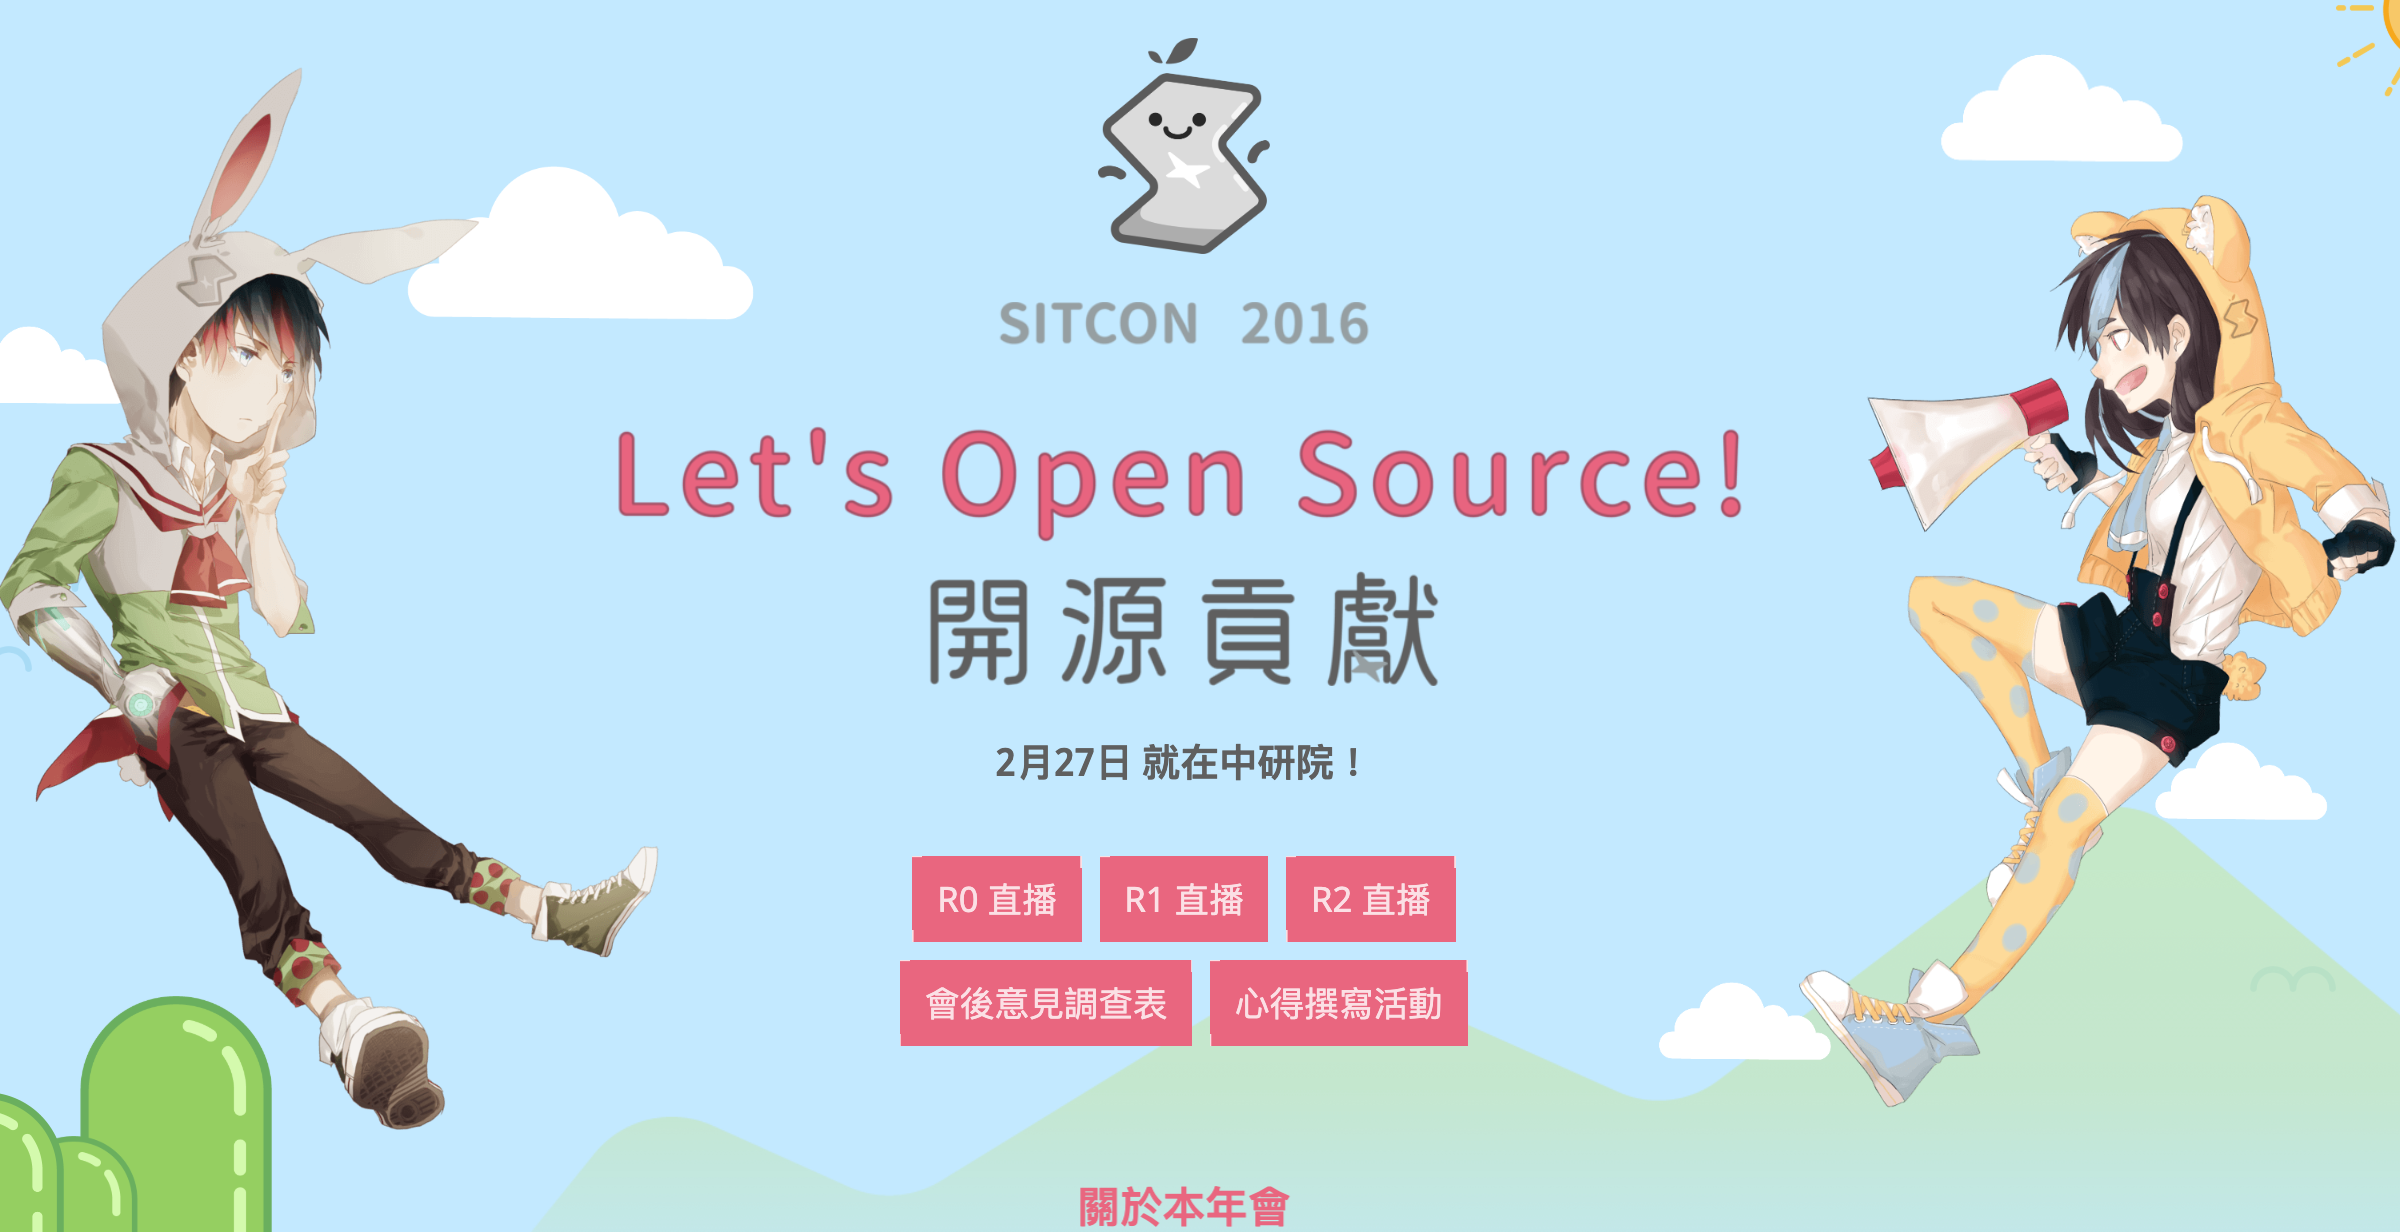 Event cover image for 學生計算機年會 SITCON 2016